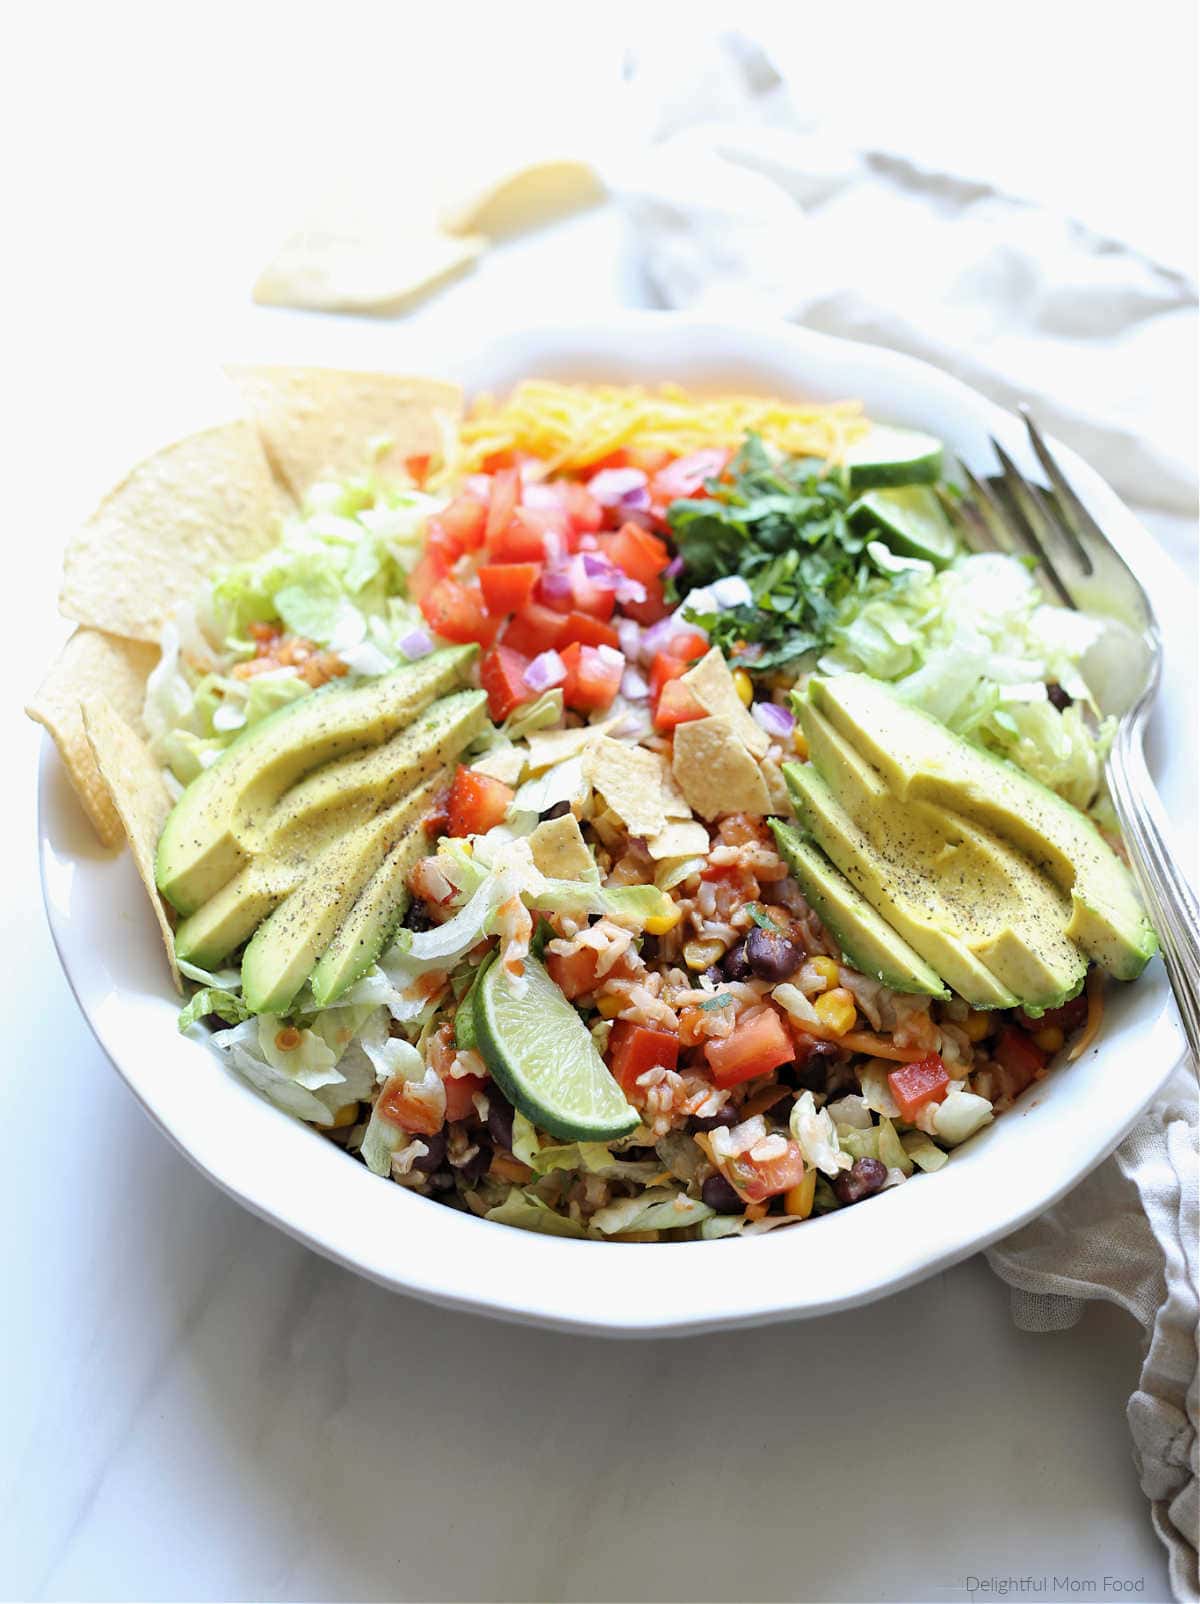 Vegetarian black bean taco salad in a bowl with serving spoon and fork.